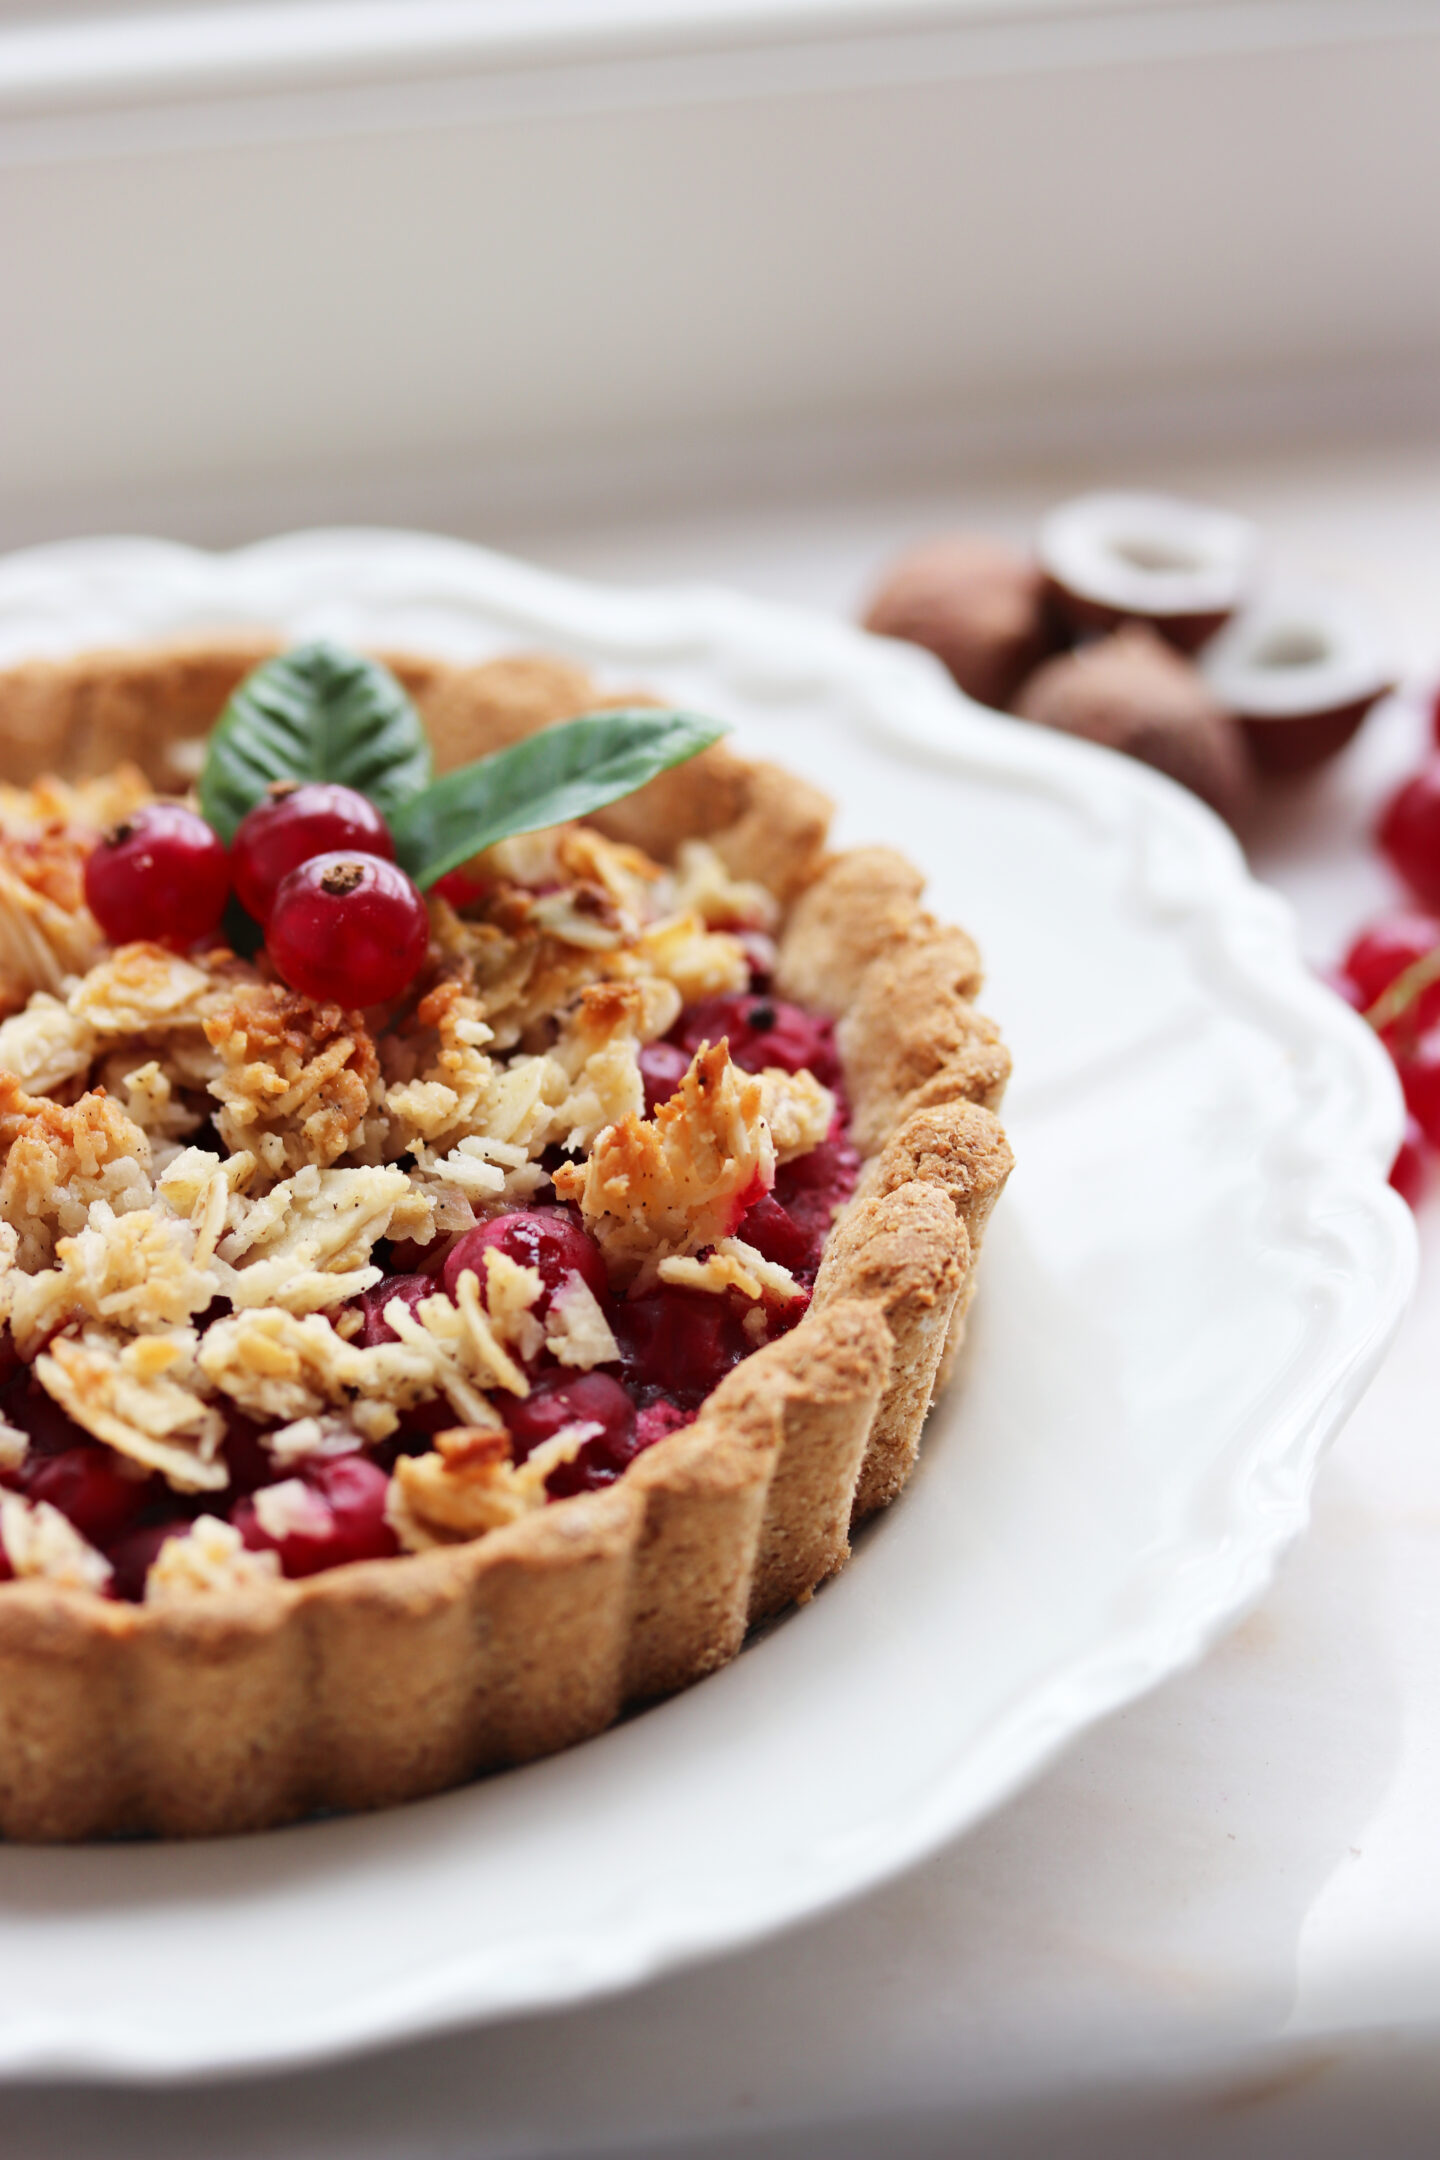 Utterly Scrumptious Coconut & Red Currant Crumble Tart